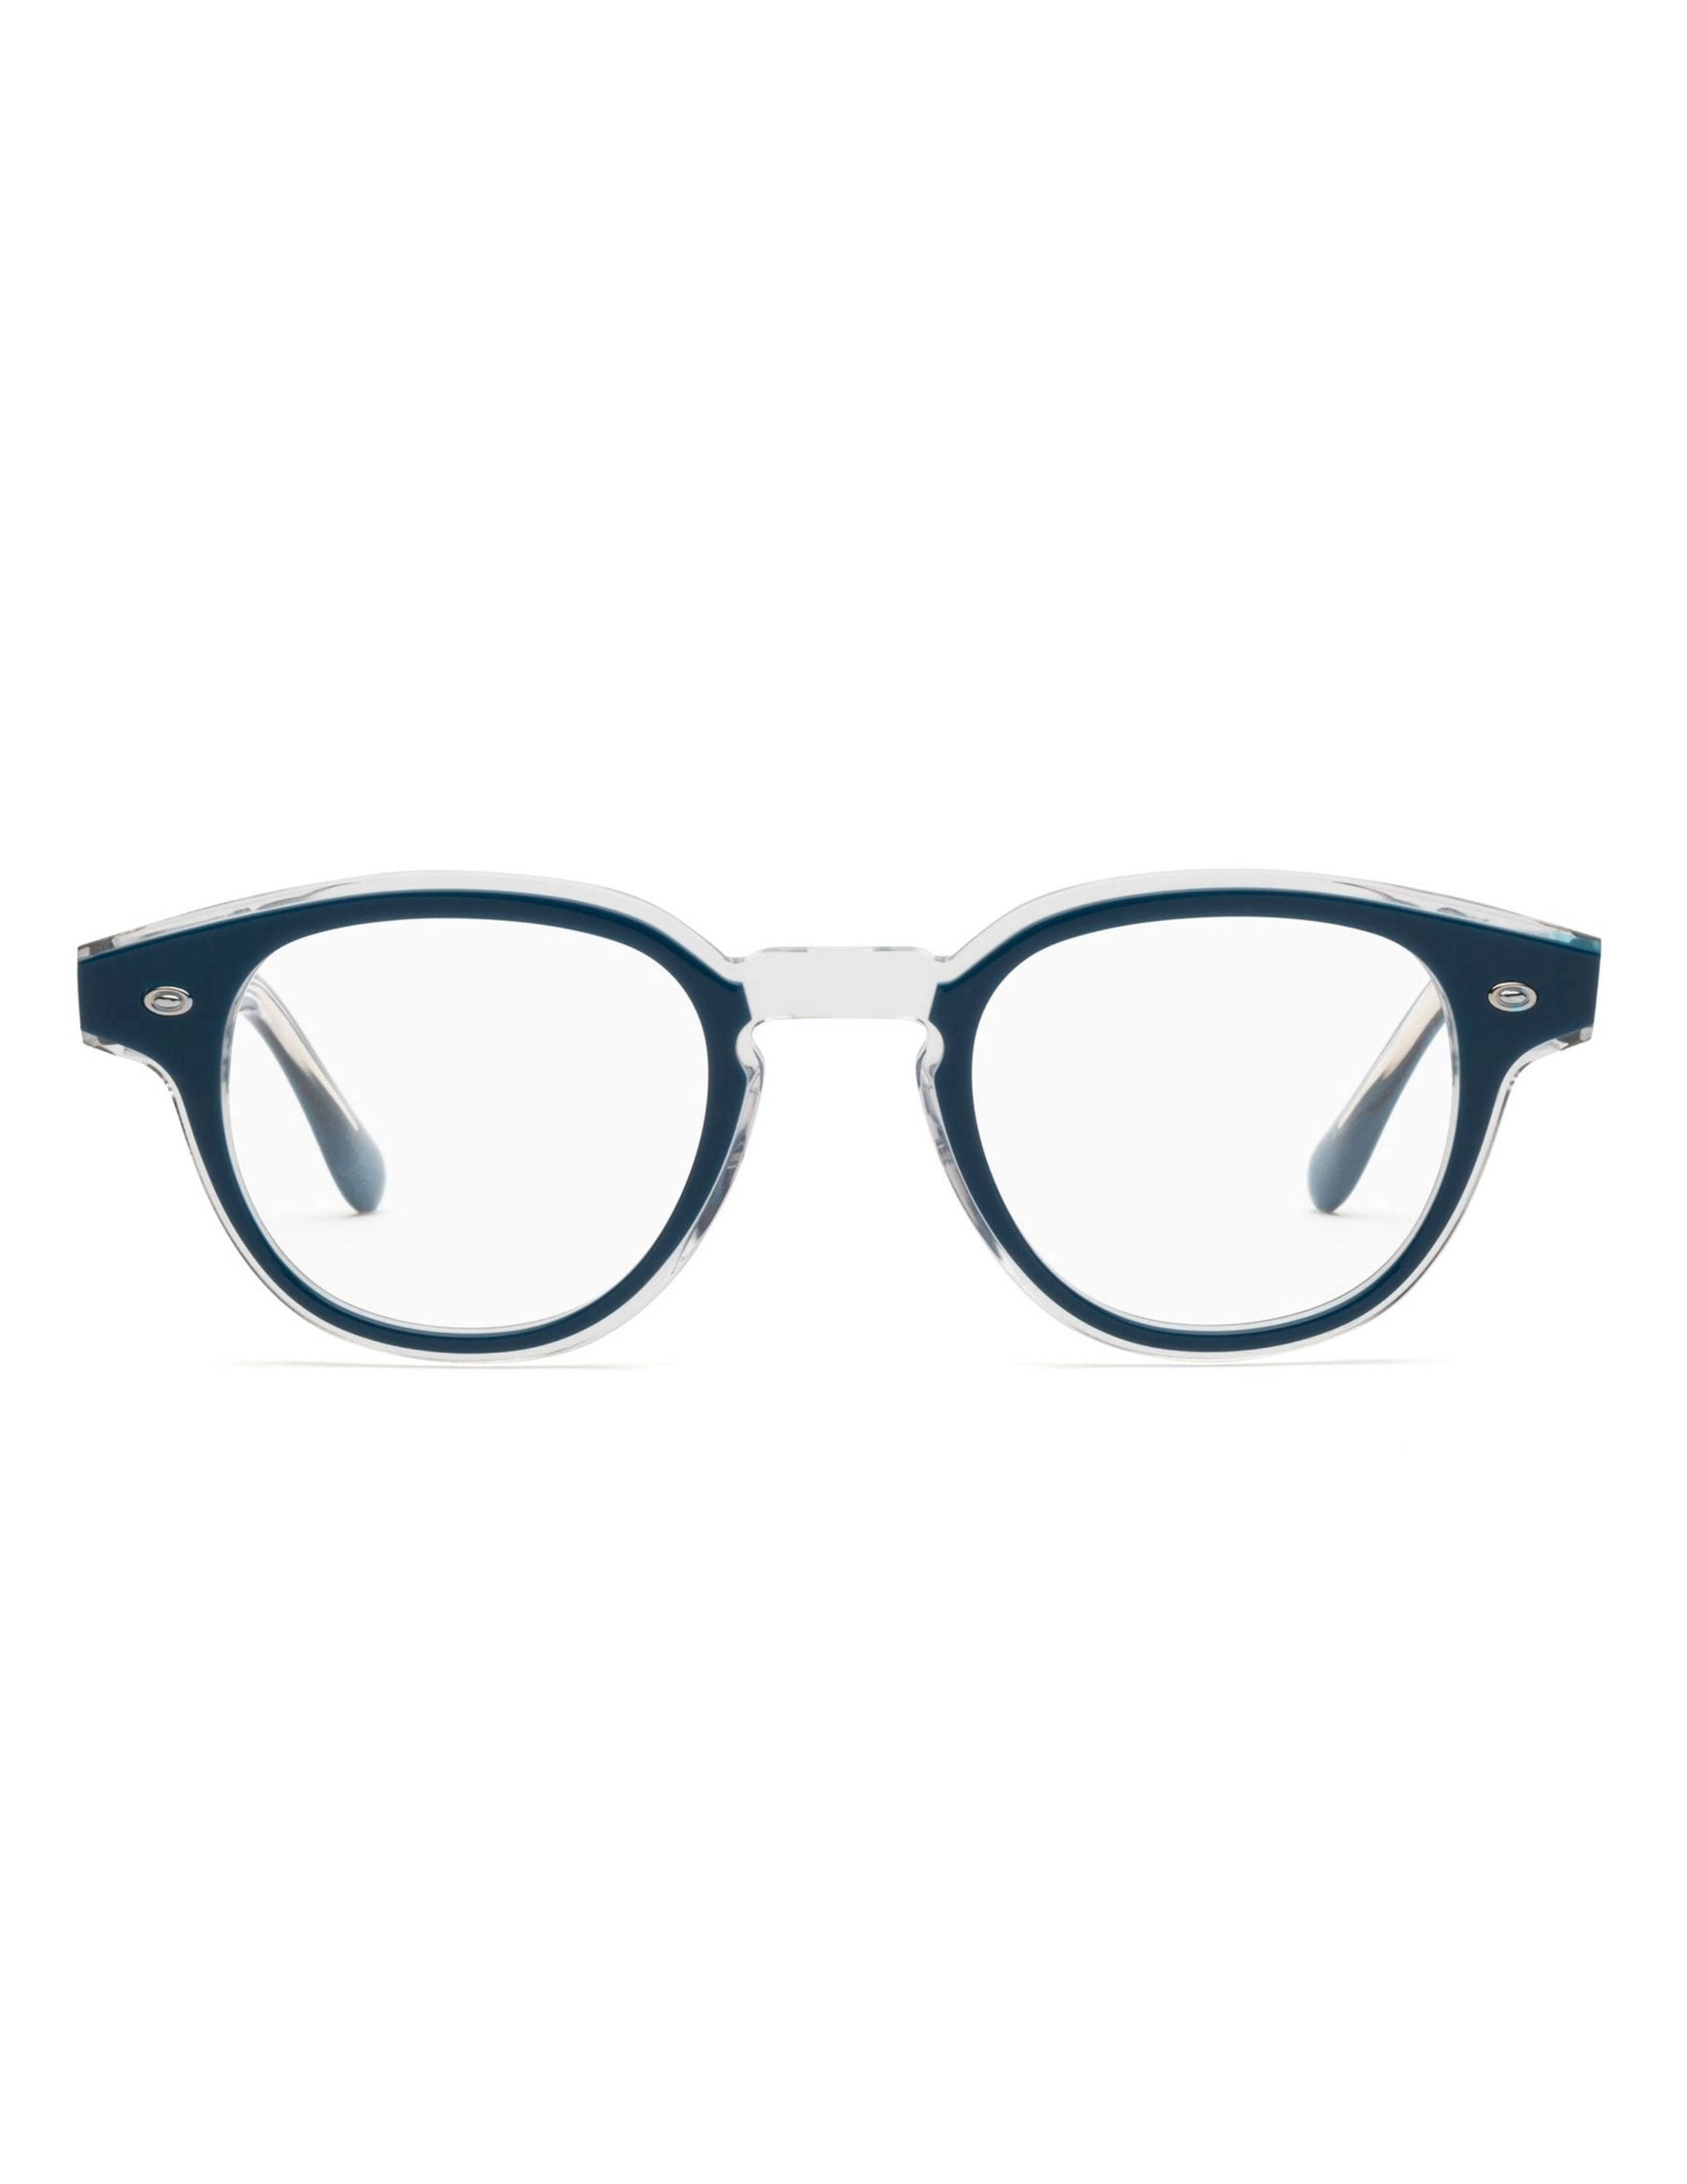 Tectonic Reading Glasses - August Blue and Vodka